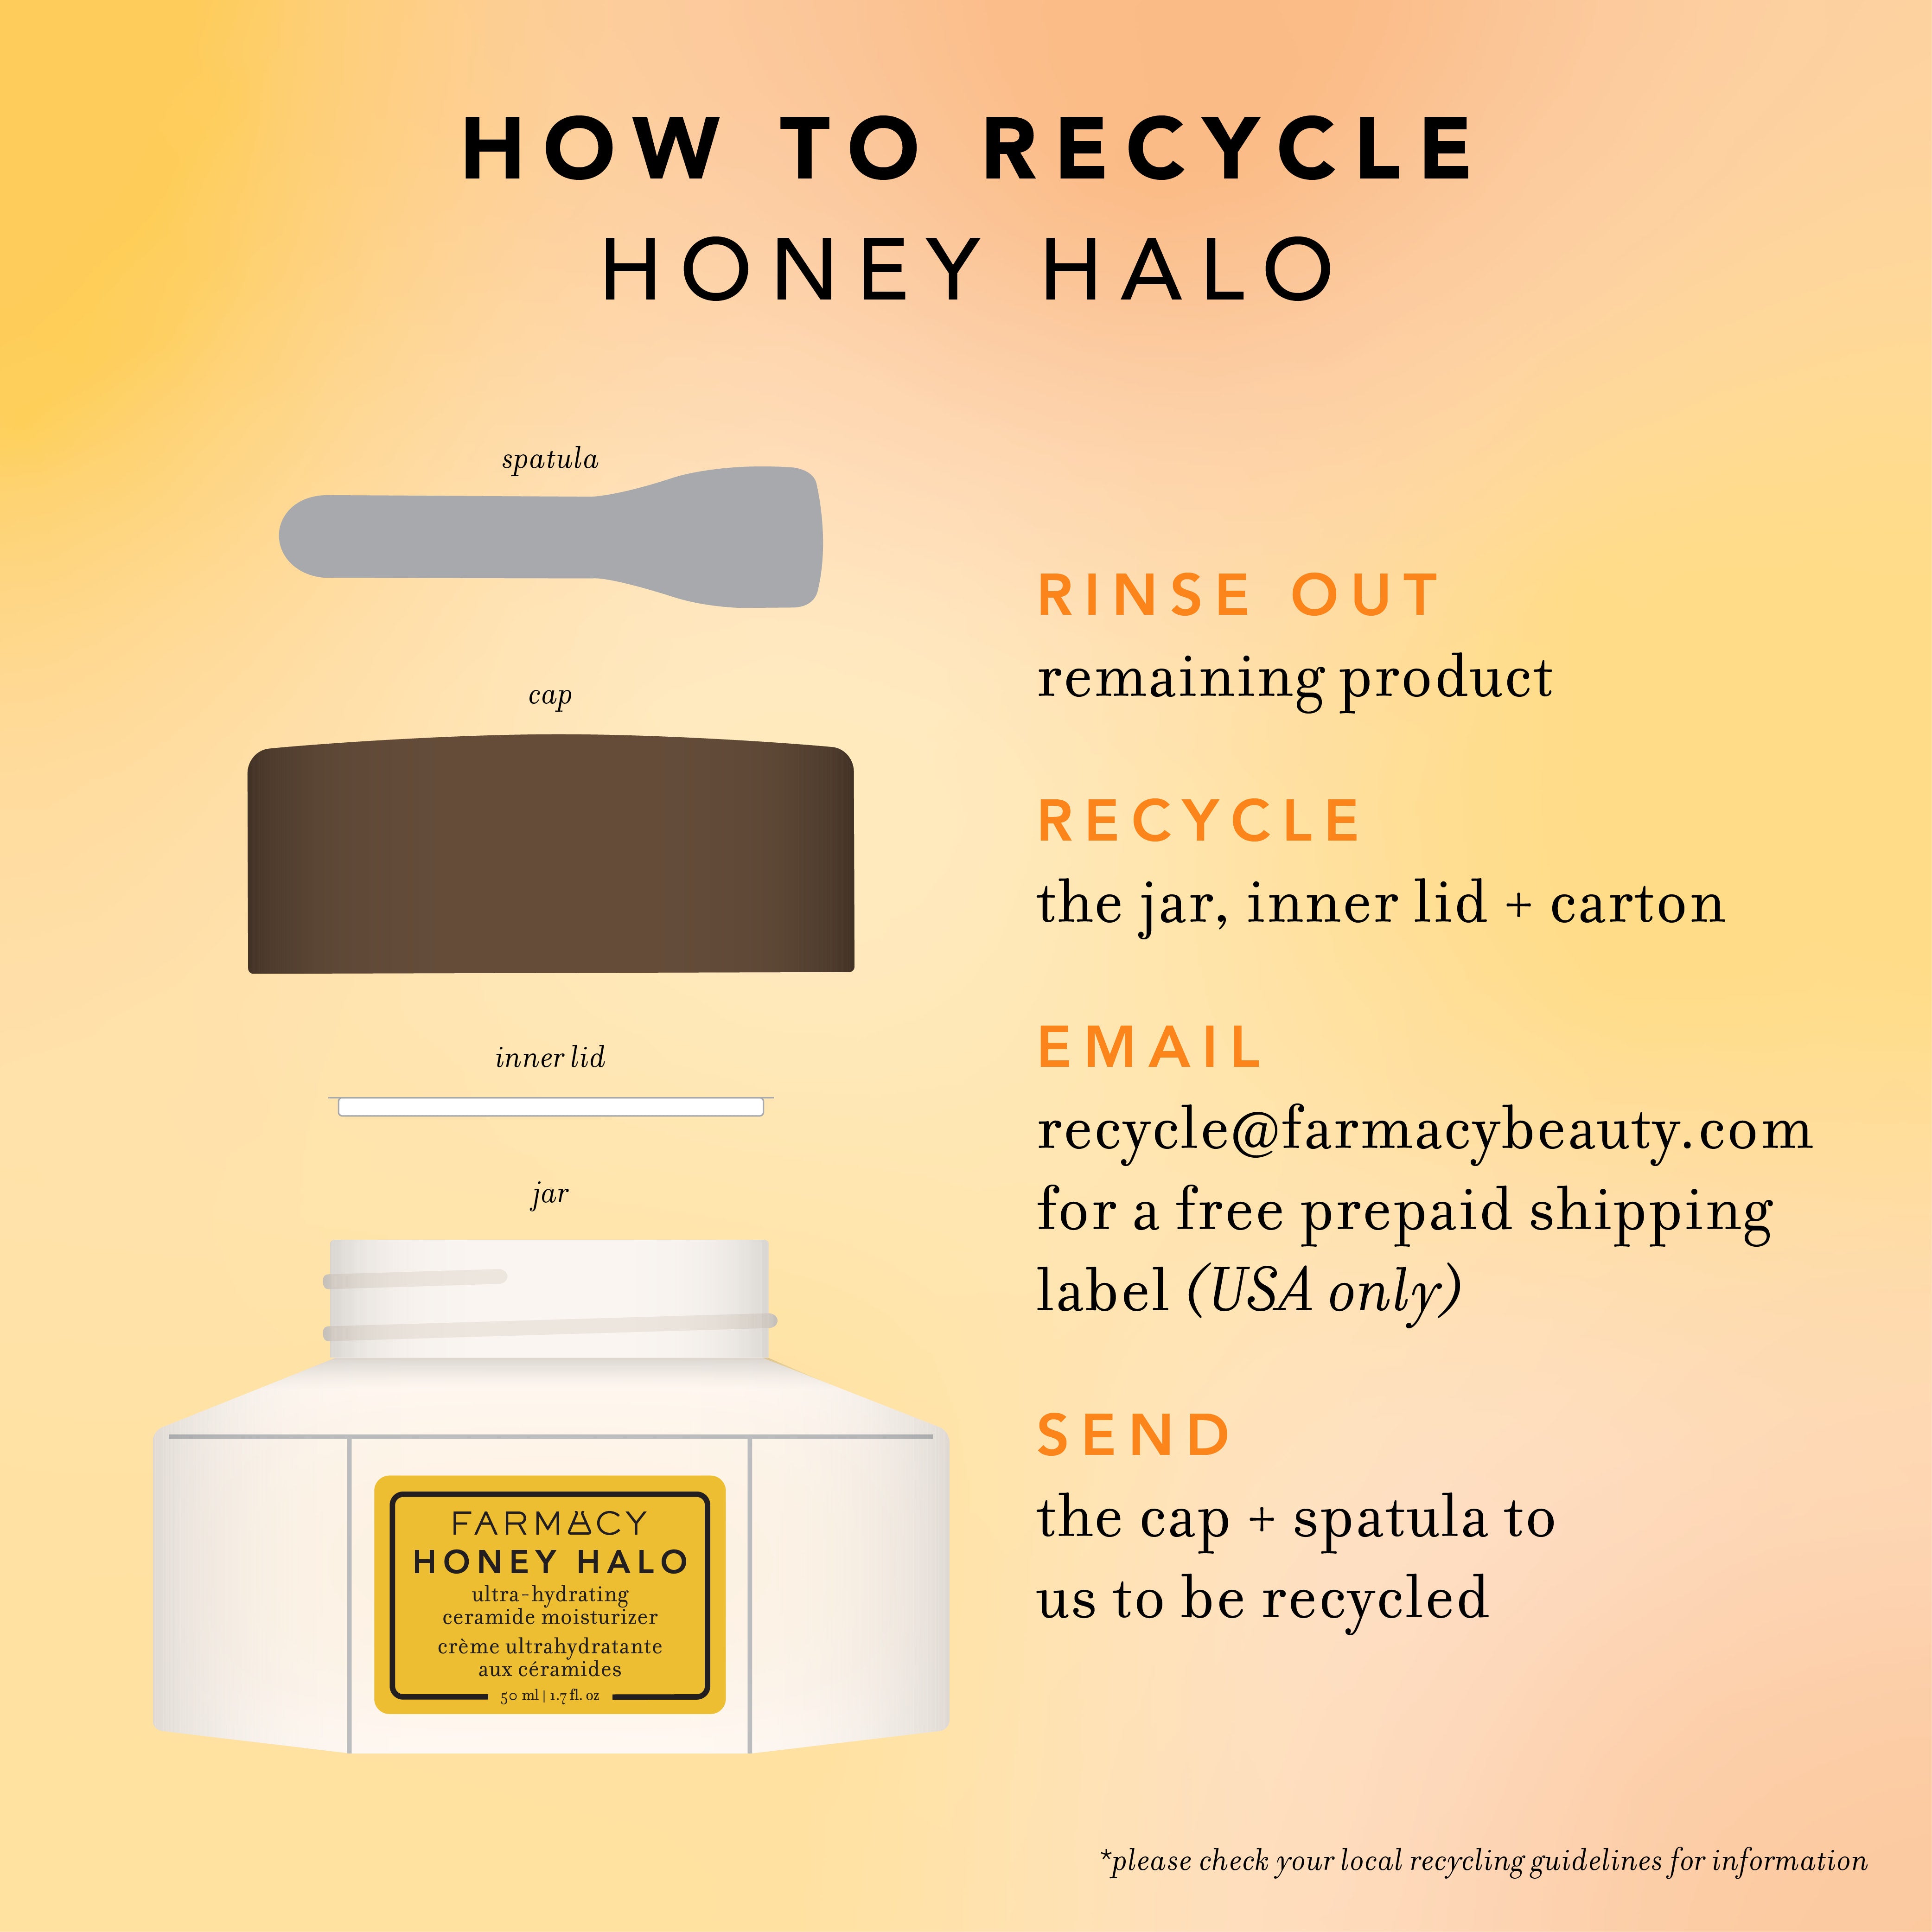 How to recycle Honey Halo